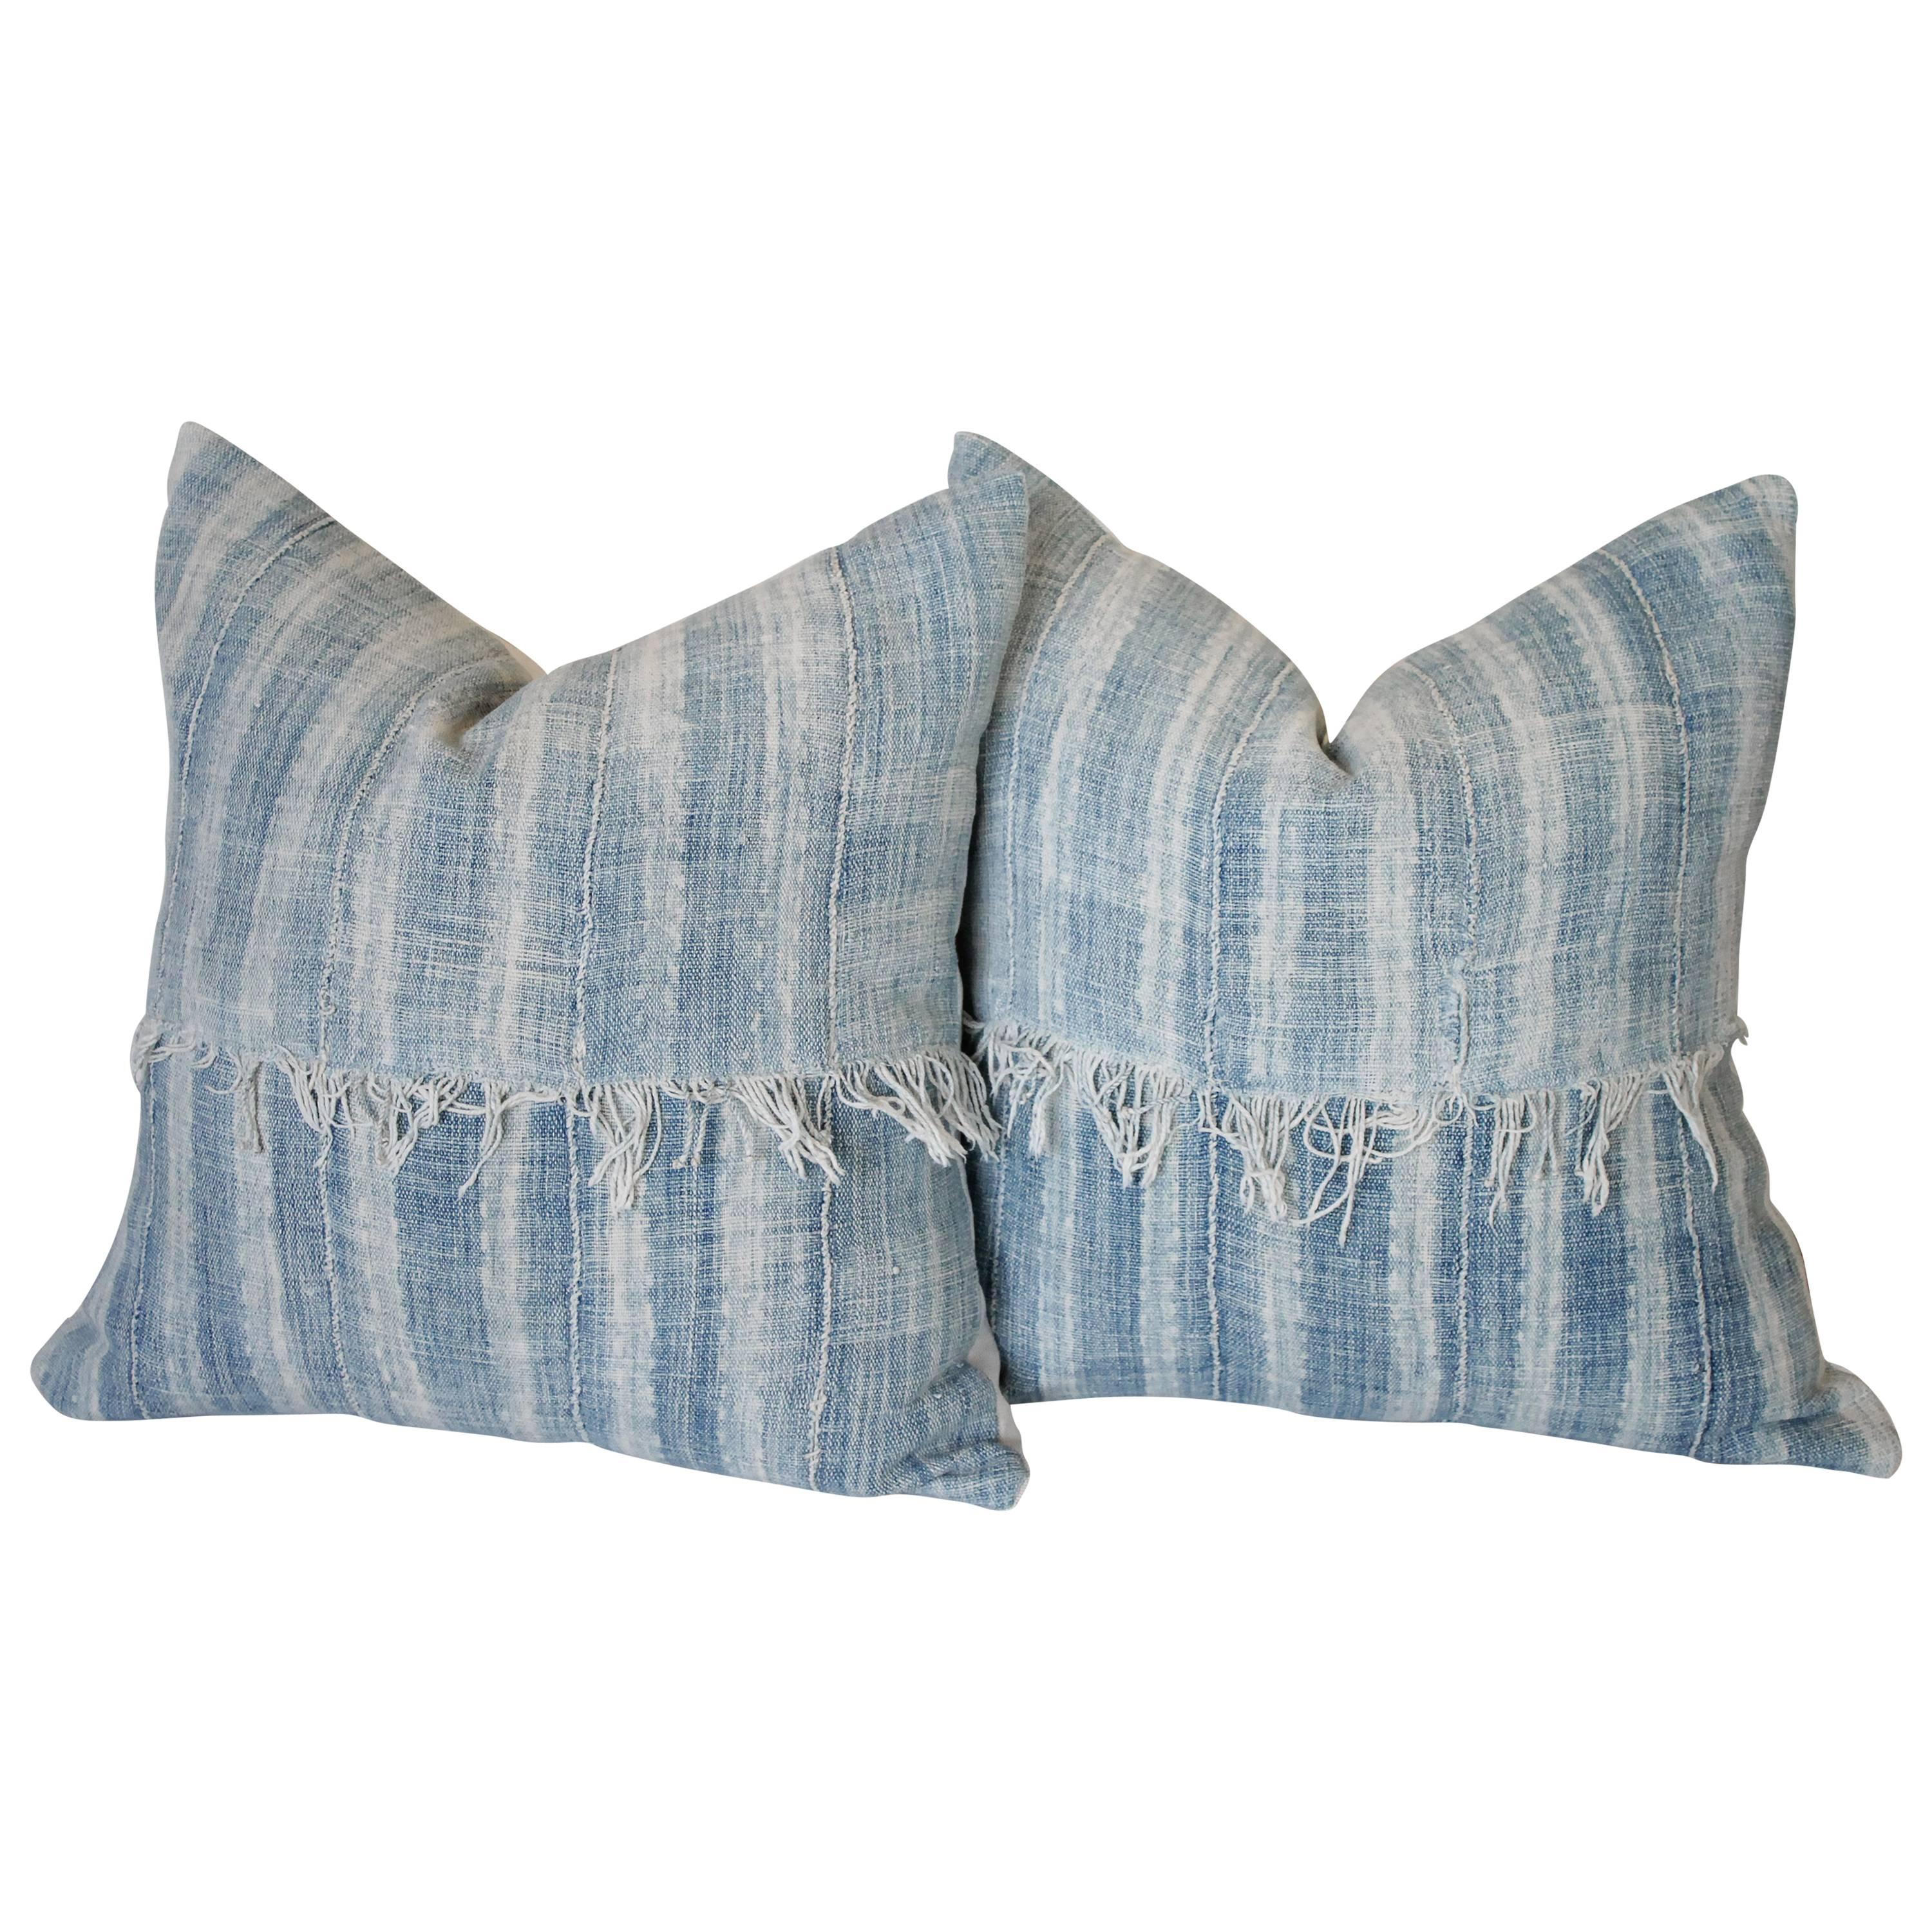 Pair of Antique Faded Blue Indigo Stripe African Mudcloth Pillows with Fringe